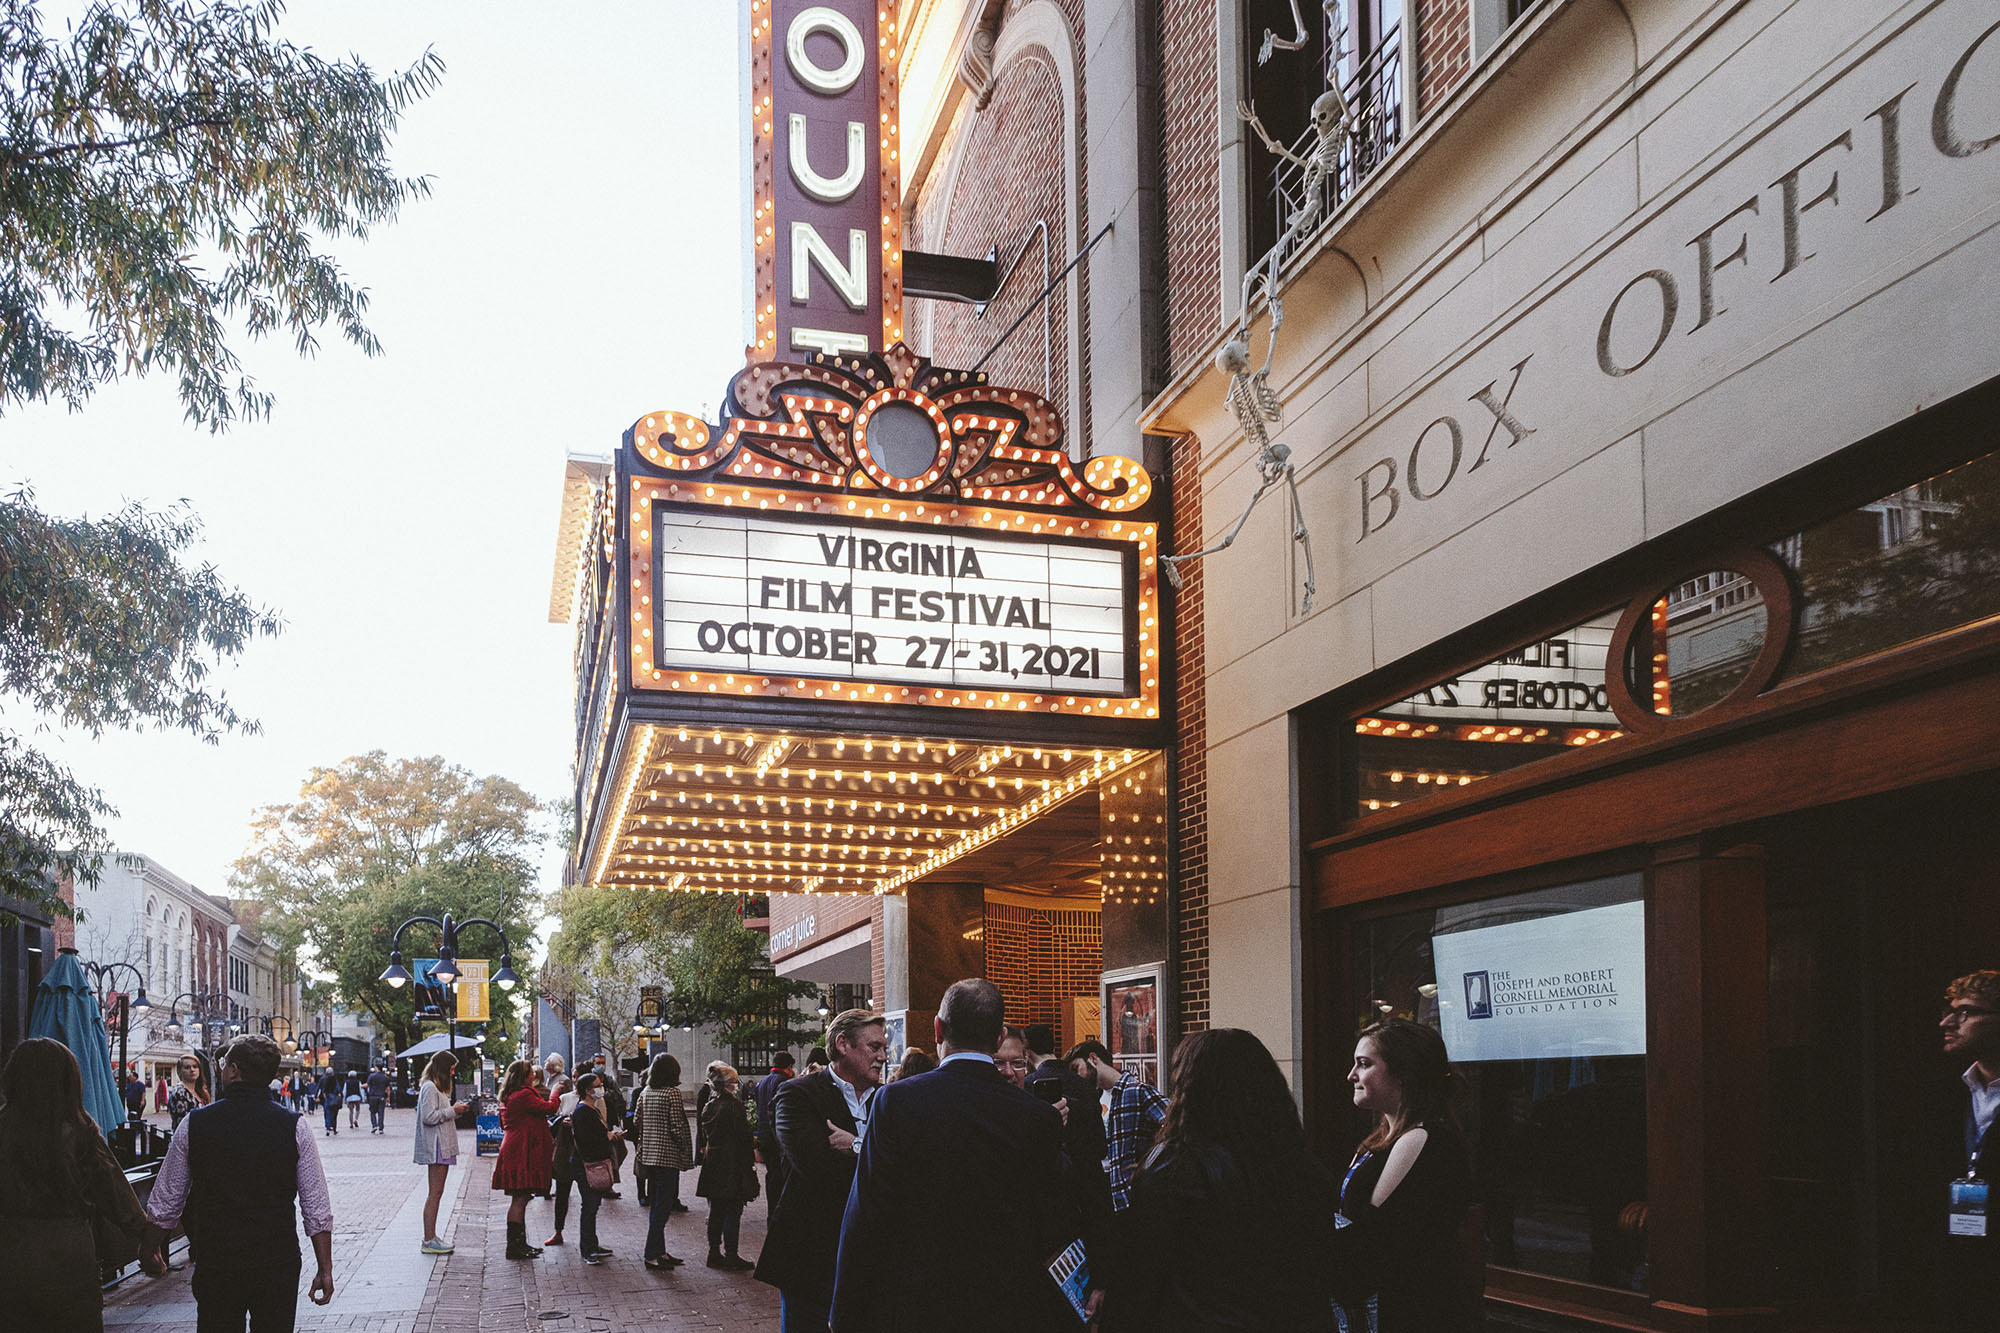 Downtown Charlottesville Theatre sign that says Virginia Film Festival October 27-31, 2021